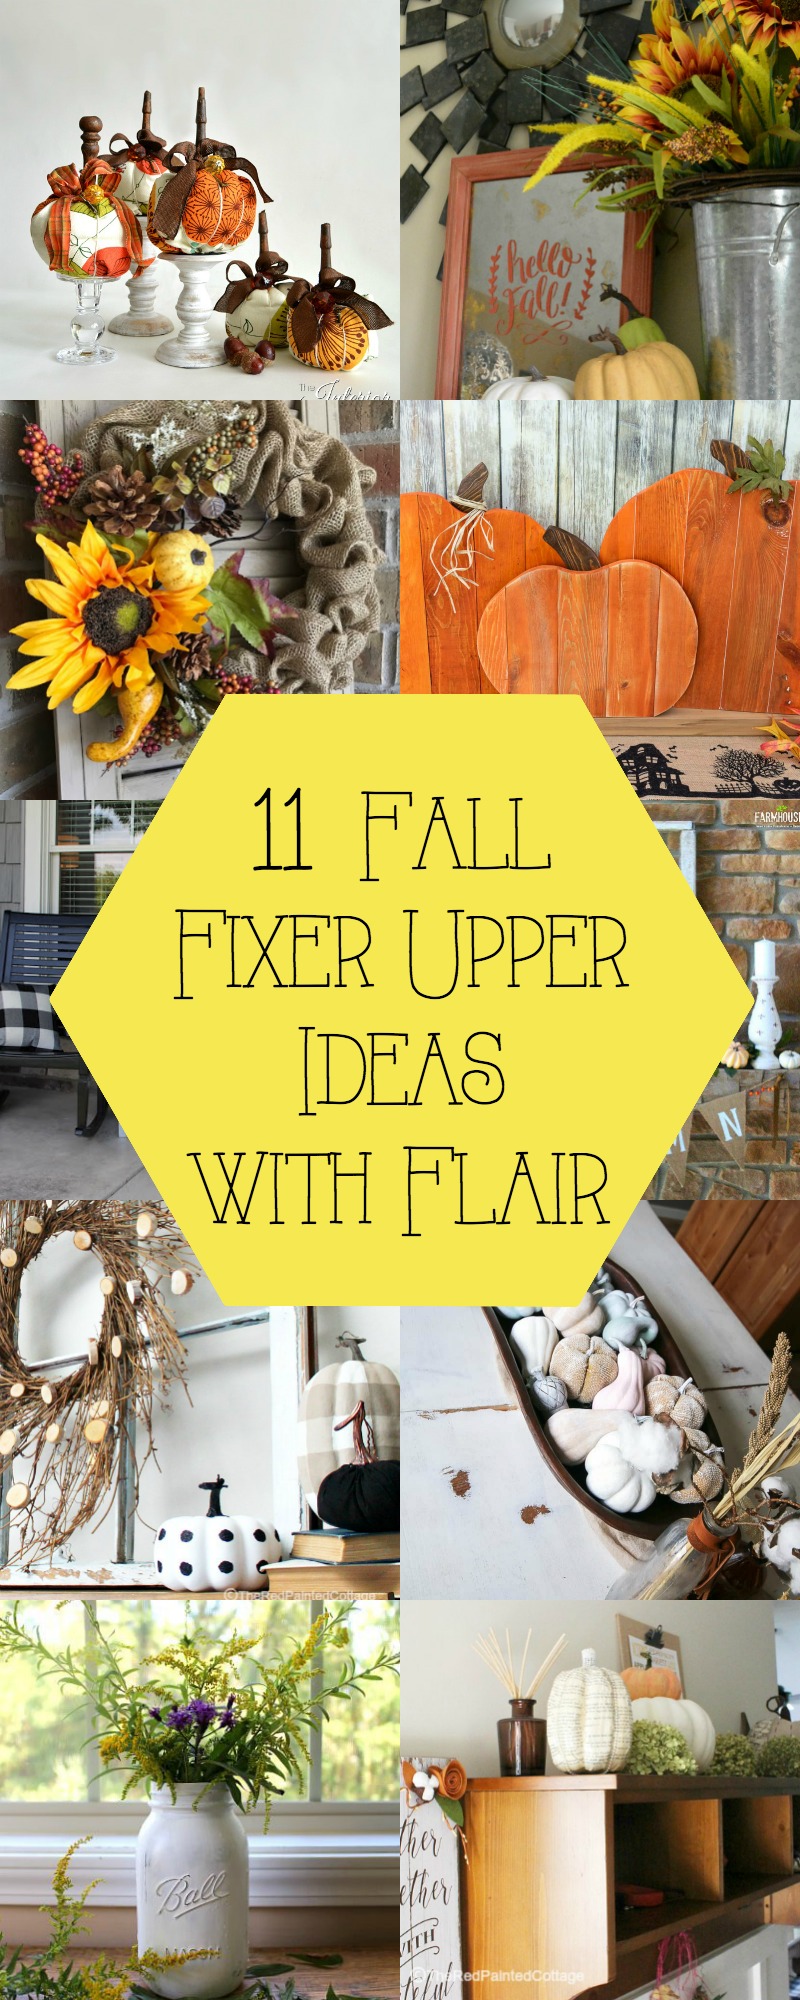 11 Fall Fixer Upper Ideas with Flair